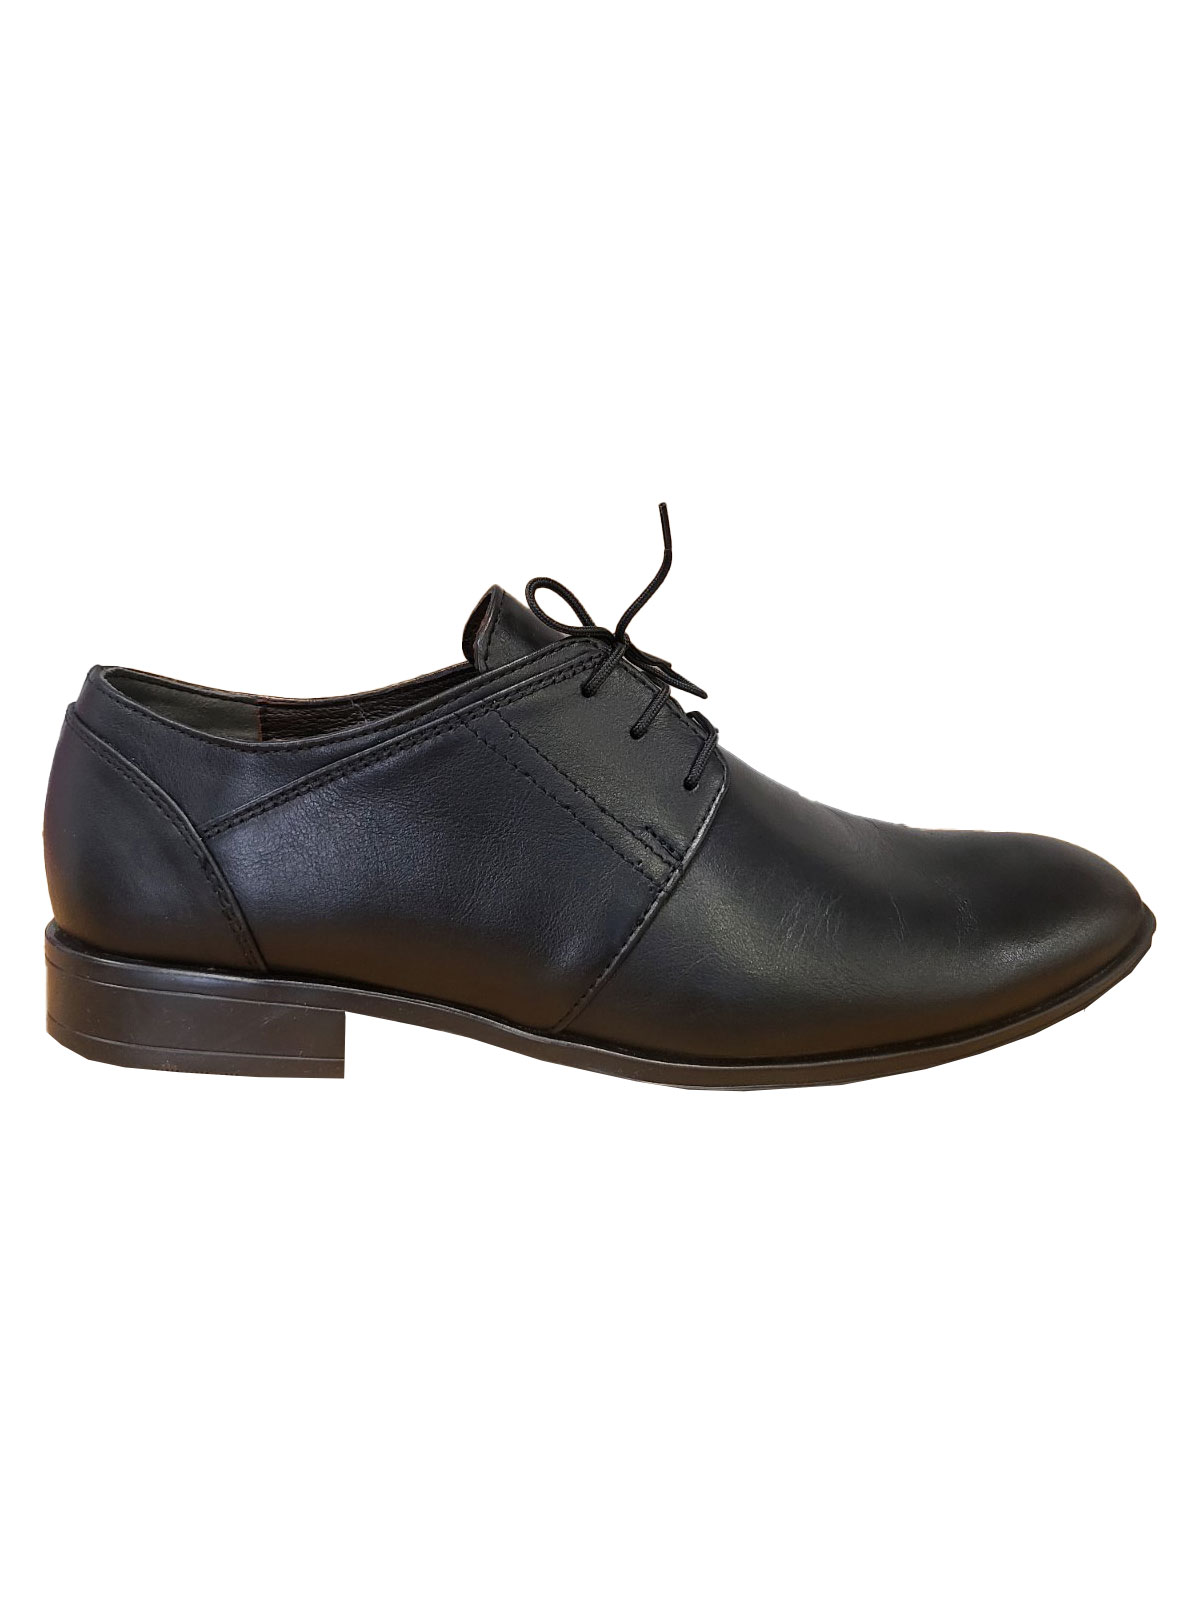 Mens classic shoes in black - 81106 - € 83.24 img2